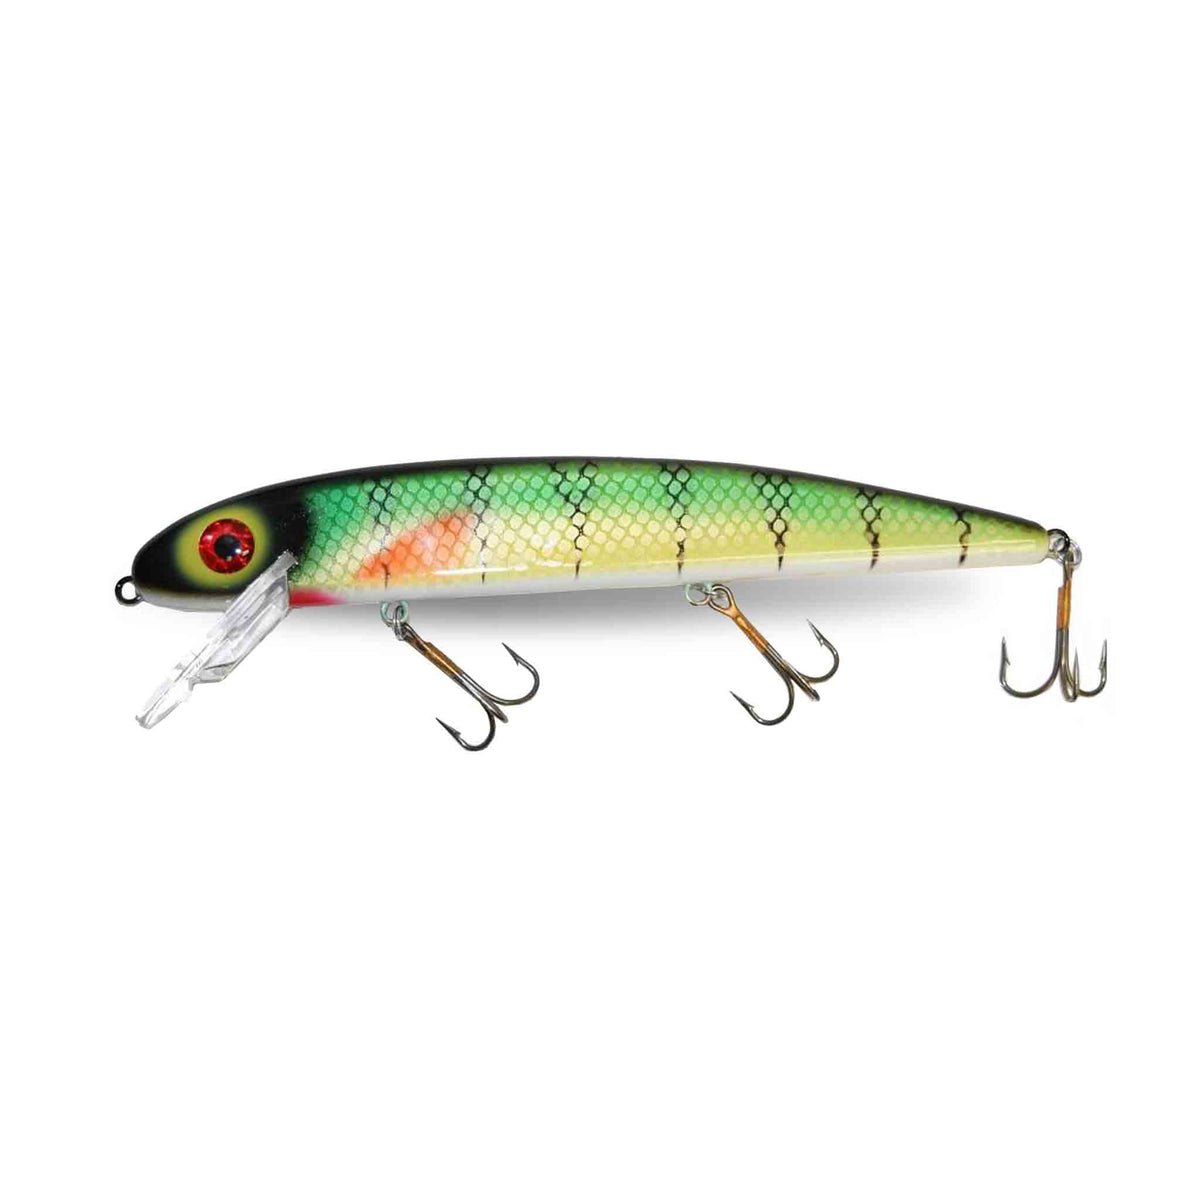 View of Crankbaits Musky Mania Tackle Jake 10'' Crankbait Perch available at EZOKO Pike and Musky Shop